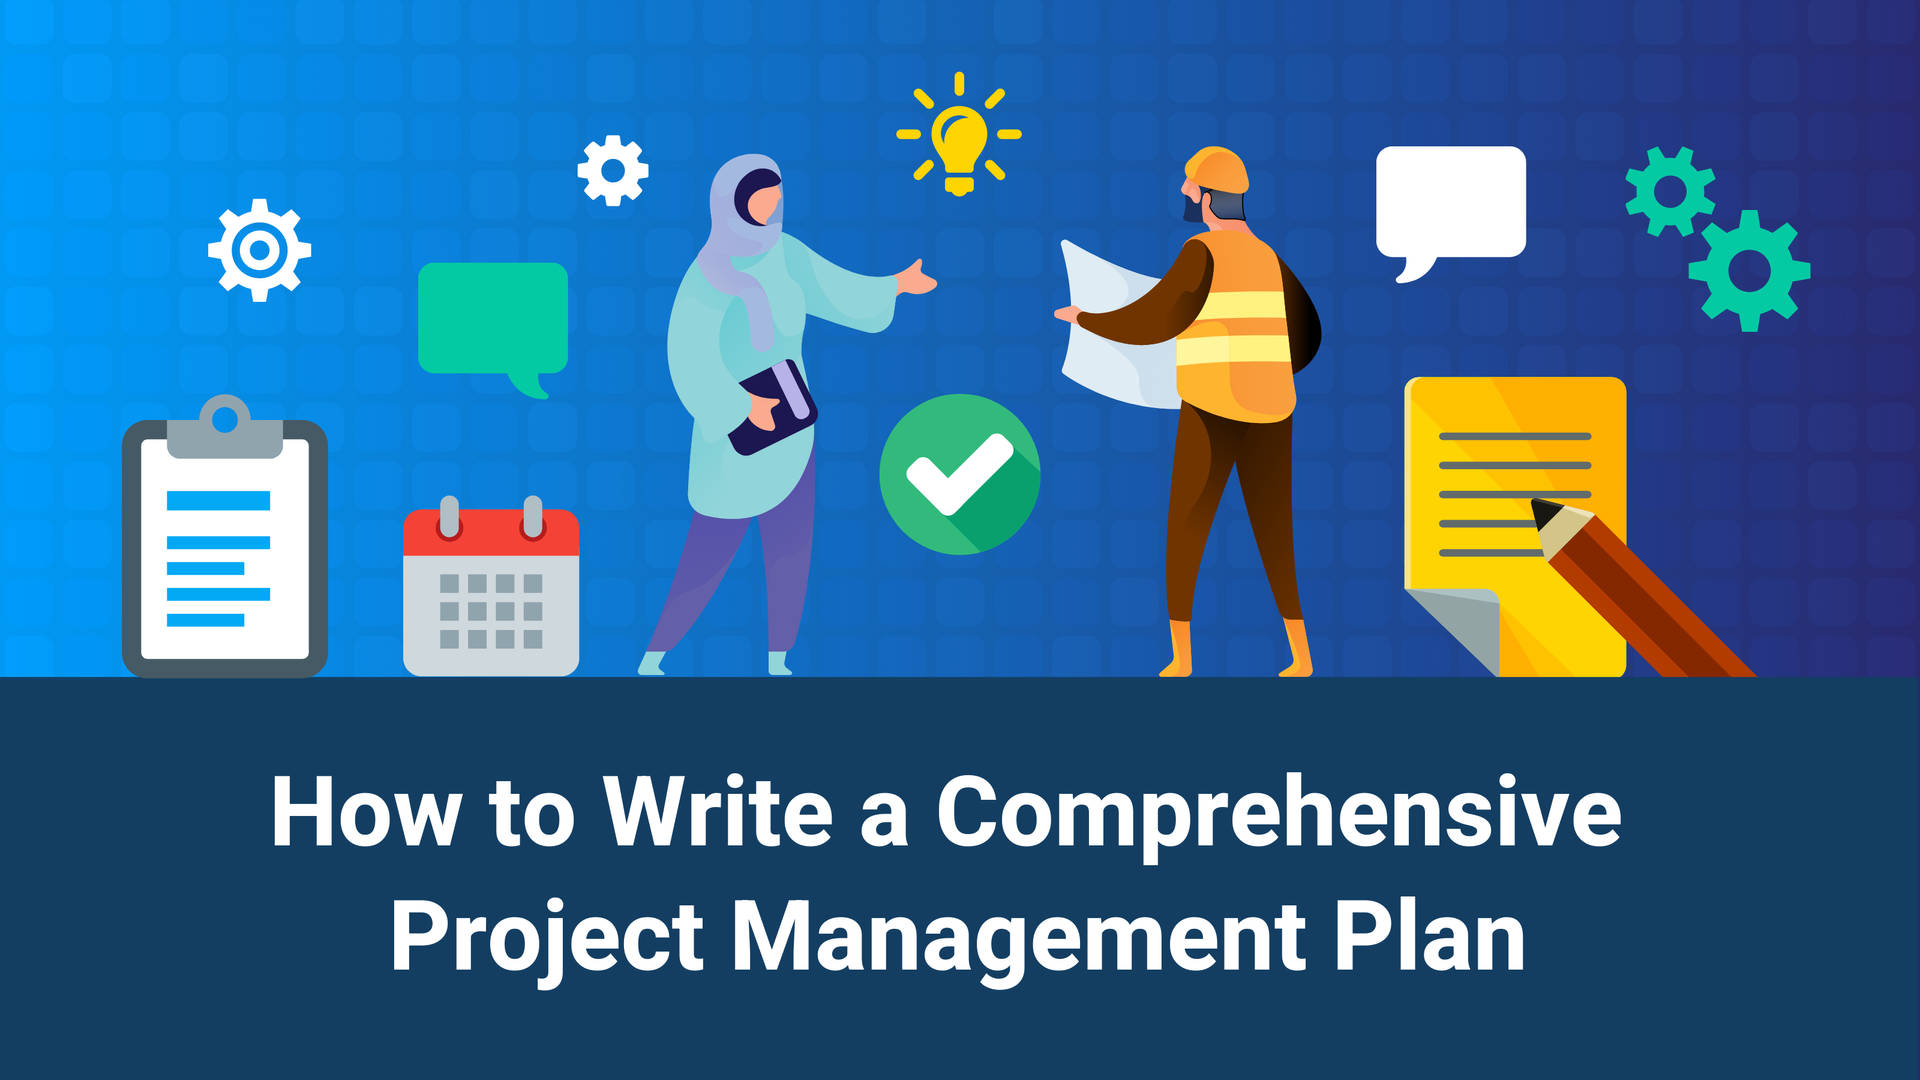 Comprehensive Project Management Plan Writing Guide Background